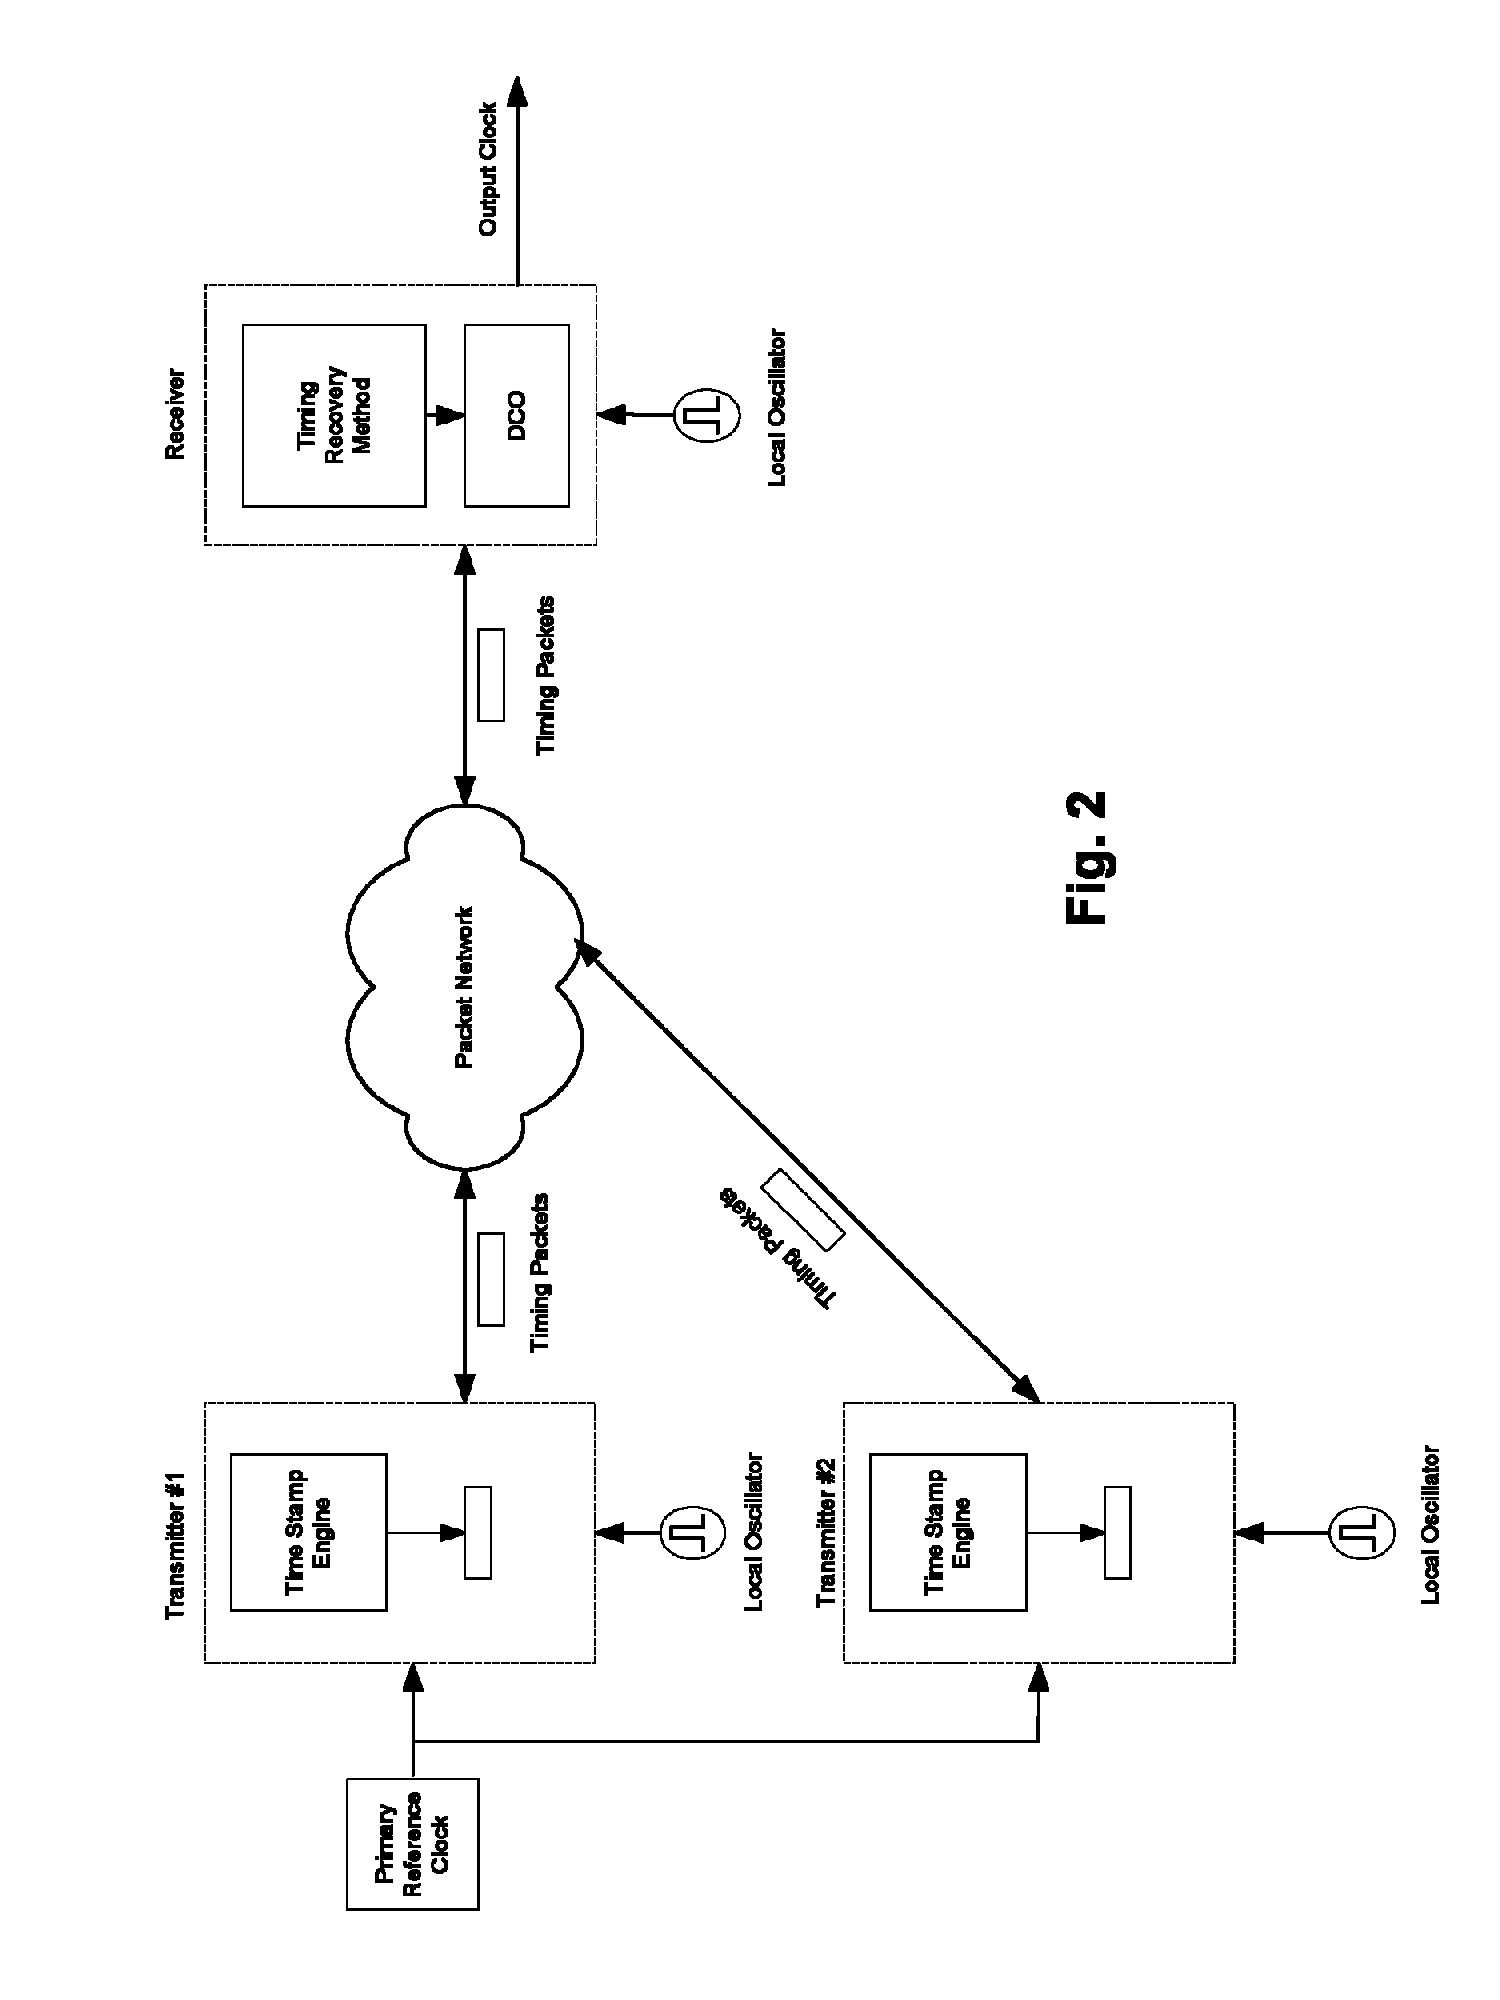 Multi input timing recovery over packet network